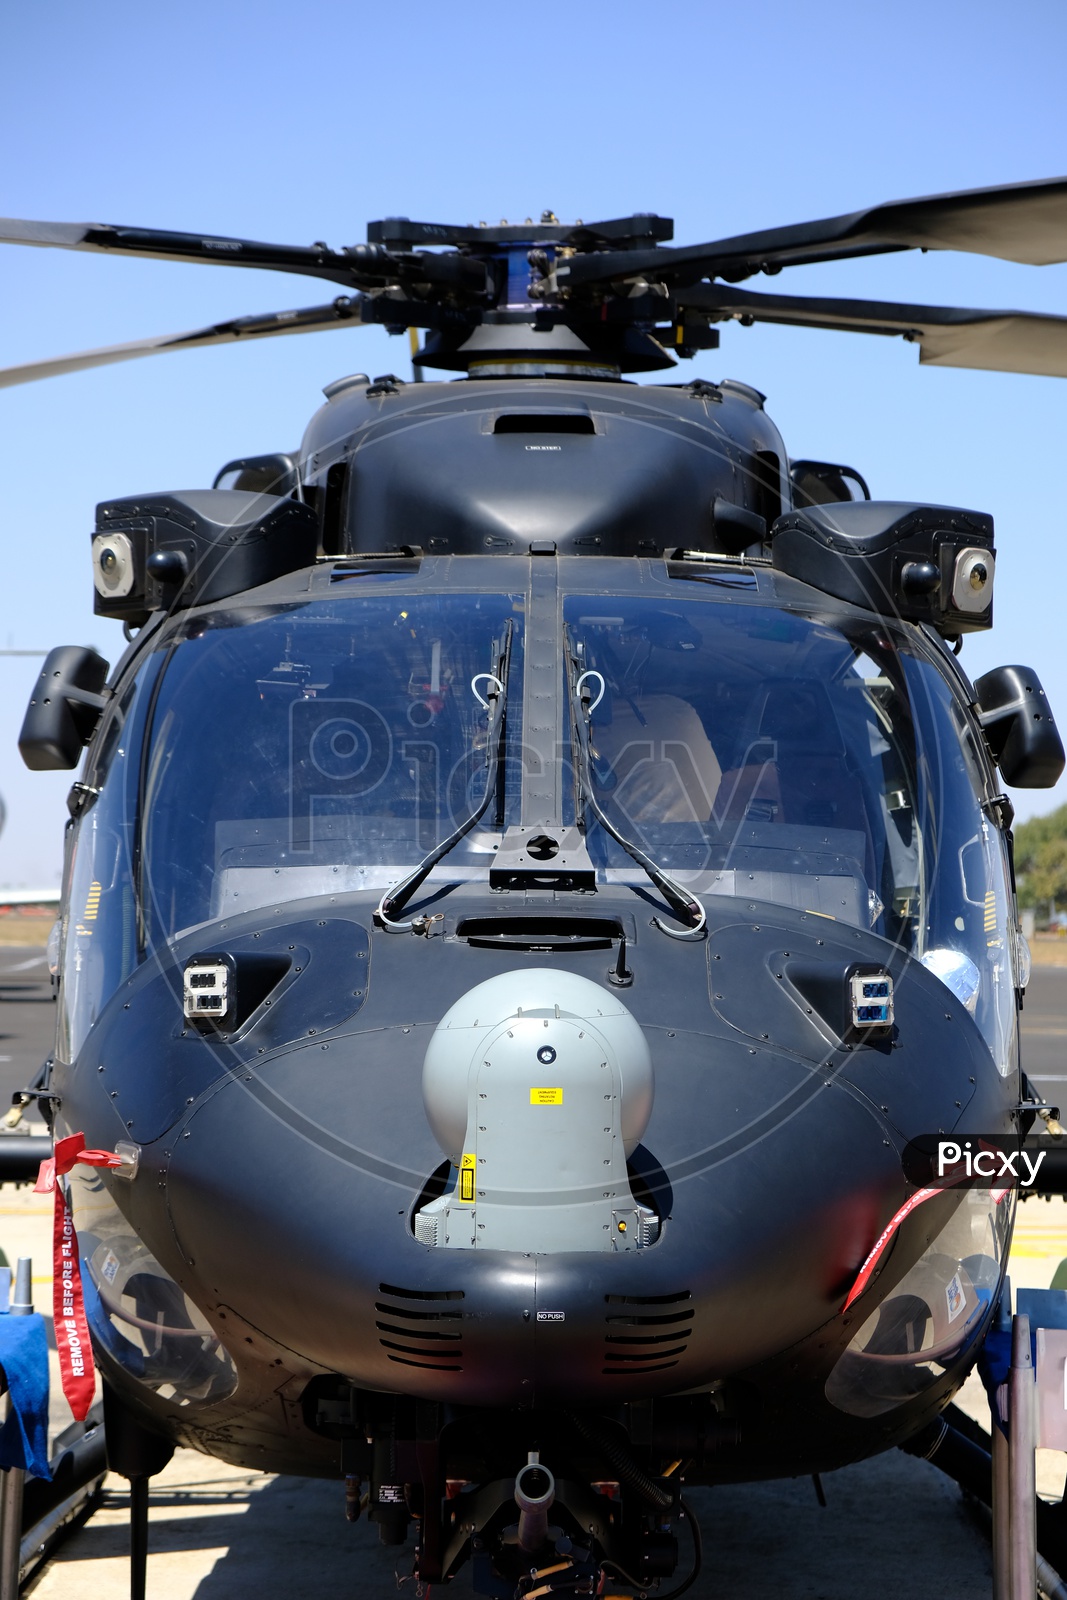 HAL Rudra is the Armed Version of ALH Dhruv at Bangalore Aero India Show 2019